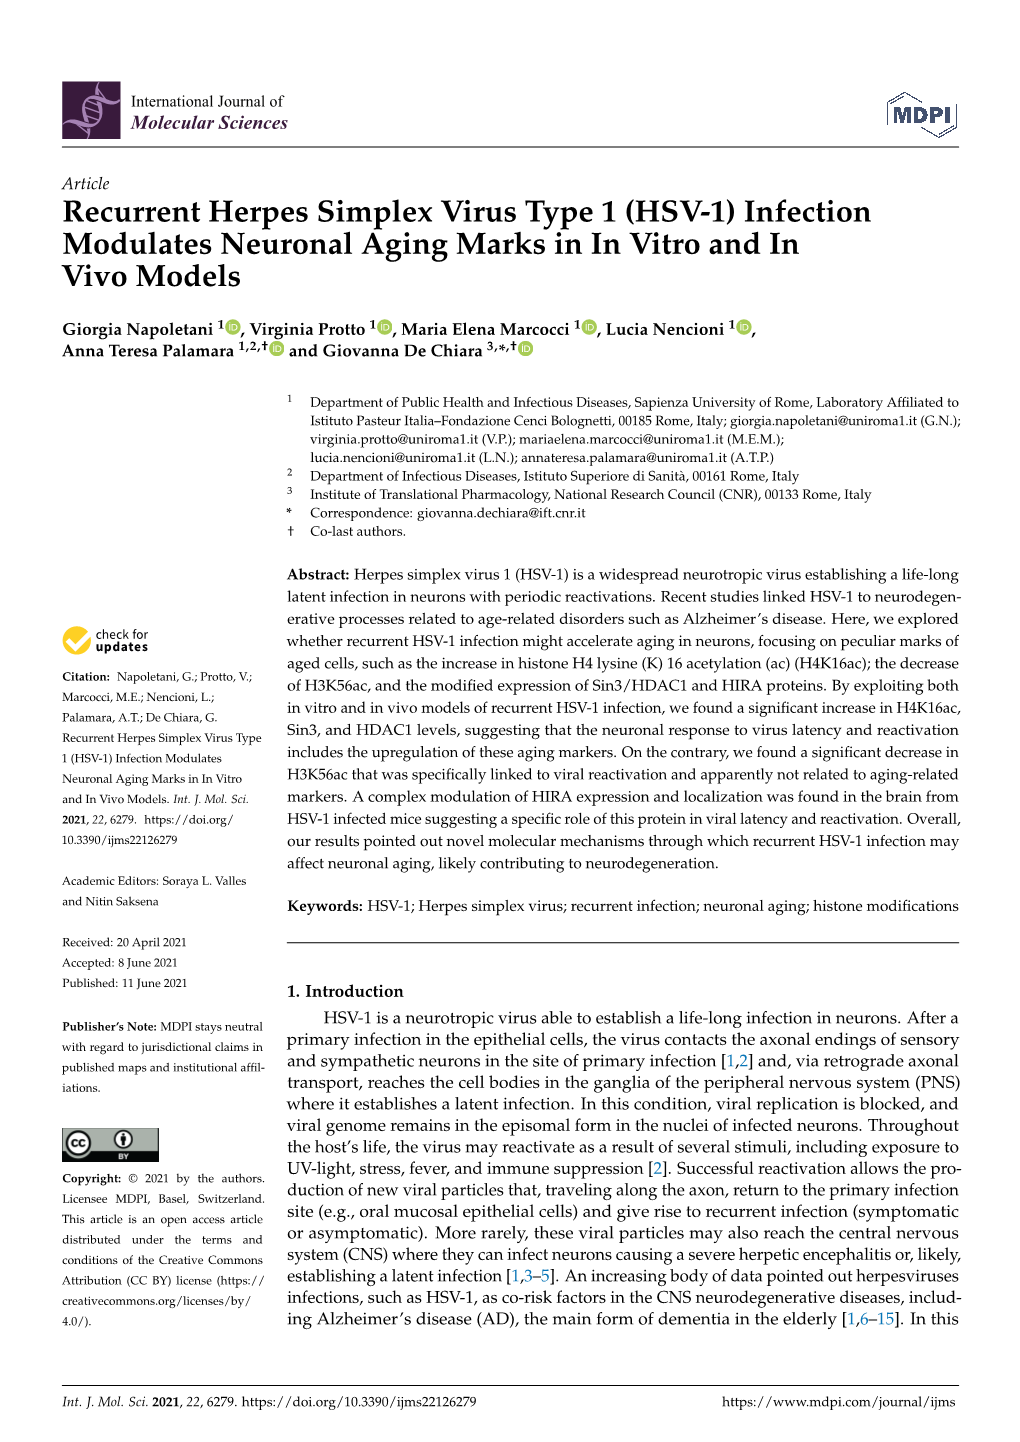 Recurrent Herpes Simplex Virus Type 1 (HSV-1) Infection Modulates Neuronal Aging Marks in in Vitro and in Vivo Models